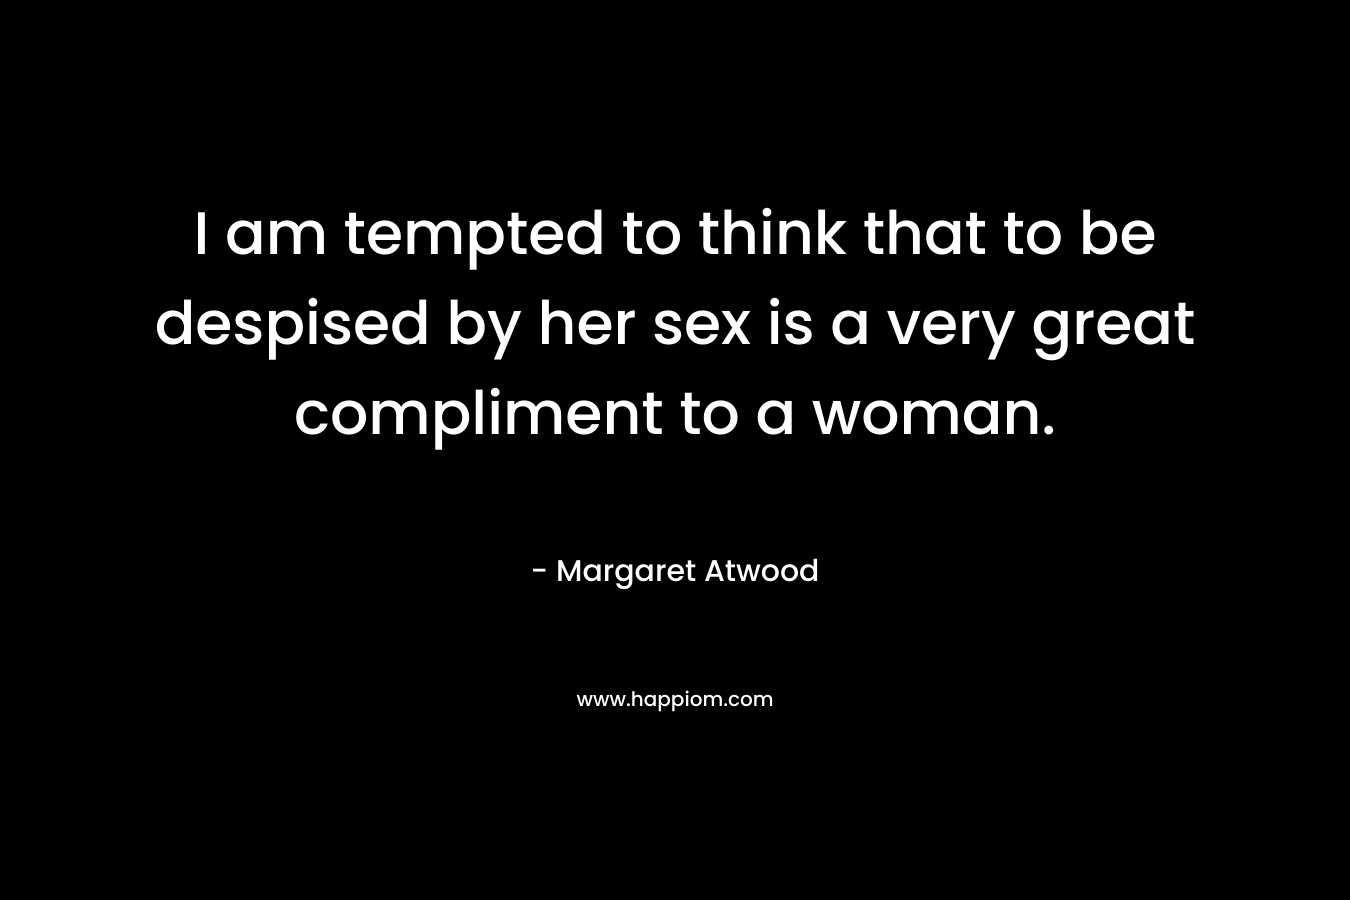 I am tempted to think that to be despised by her sex is a very great compliment to a woman. – Margaret Atwood